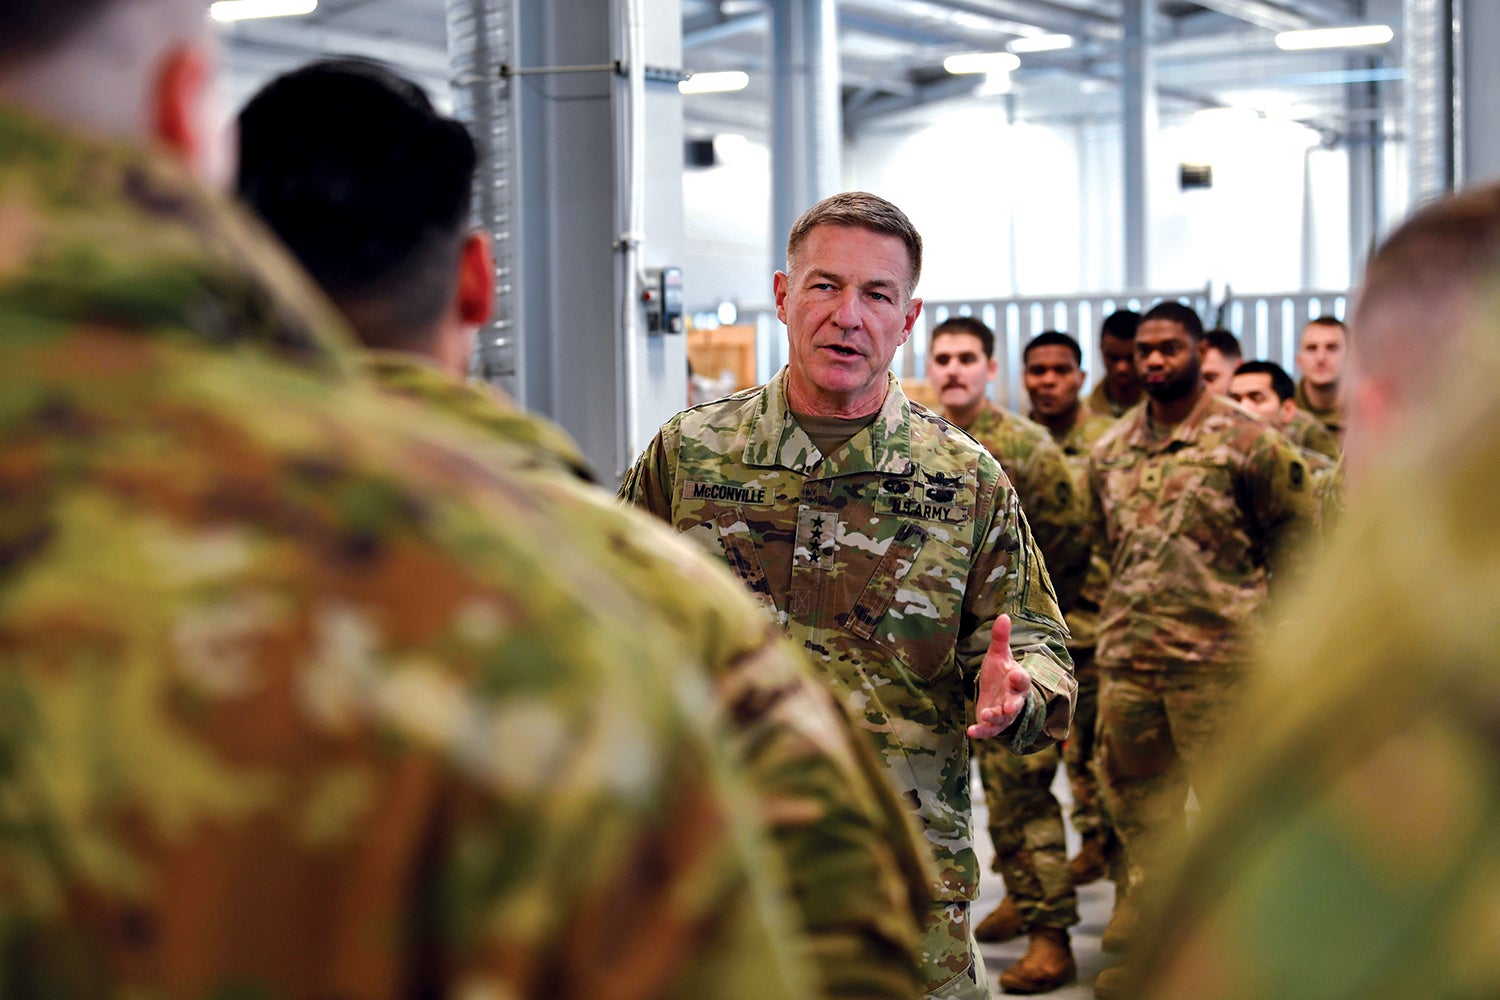 Army Chief of Staff Gen. James McConville speaks with soldiers deployed to Poland in December. (Credit: U.S. Army/Master Sgt. Joseph Moore)